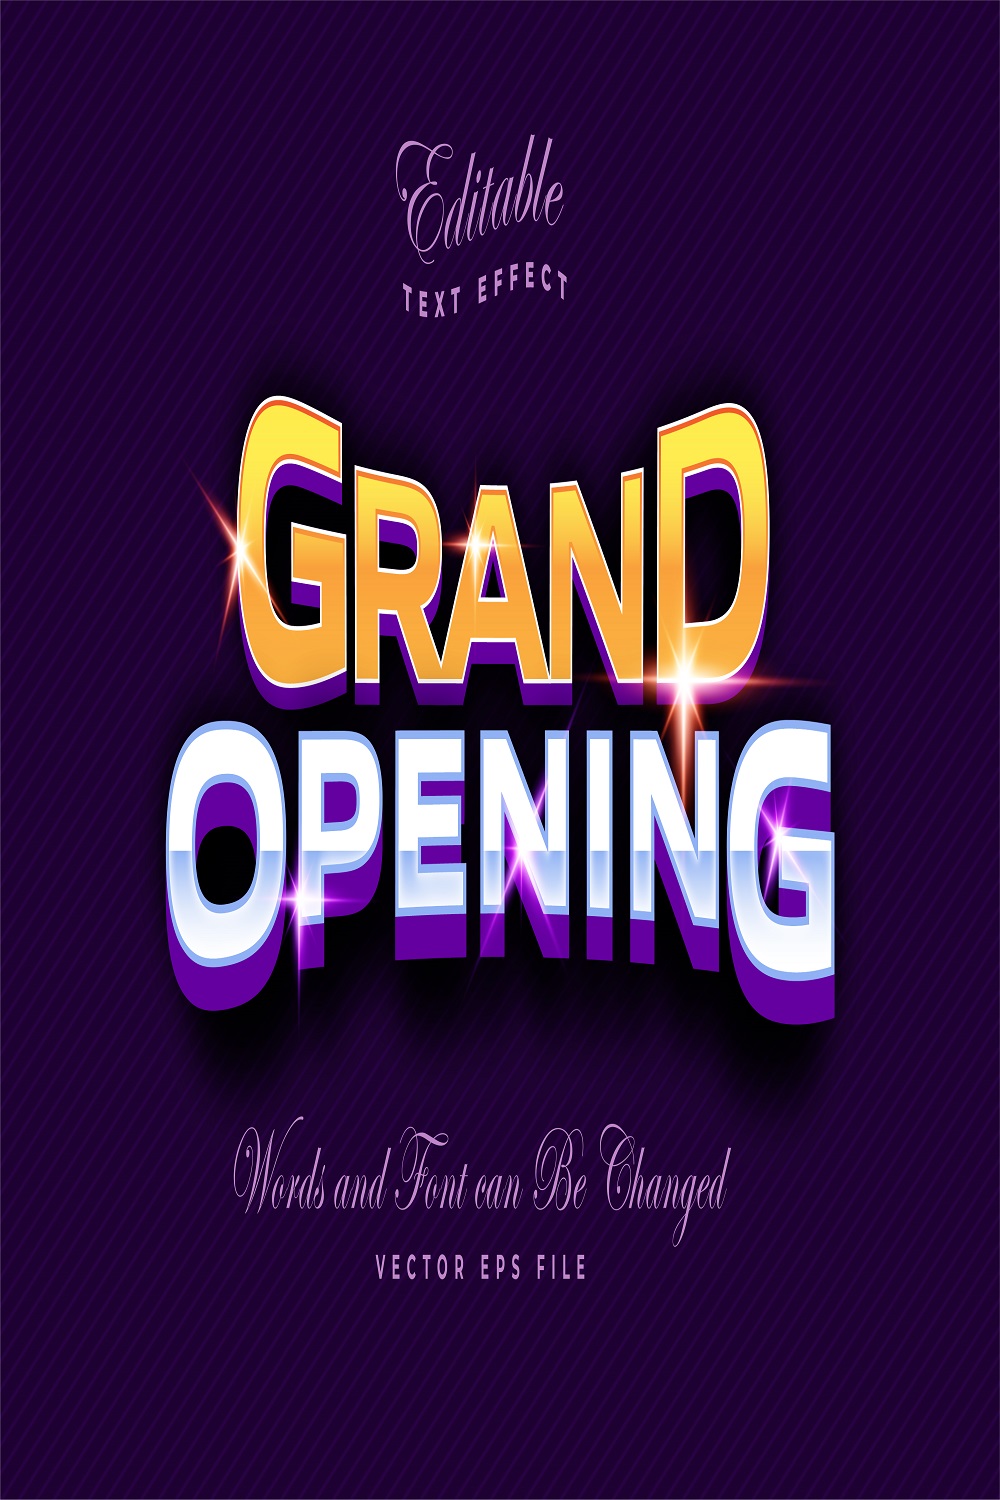 Grand opening text effect pinterest preview image.